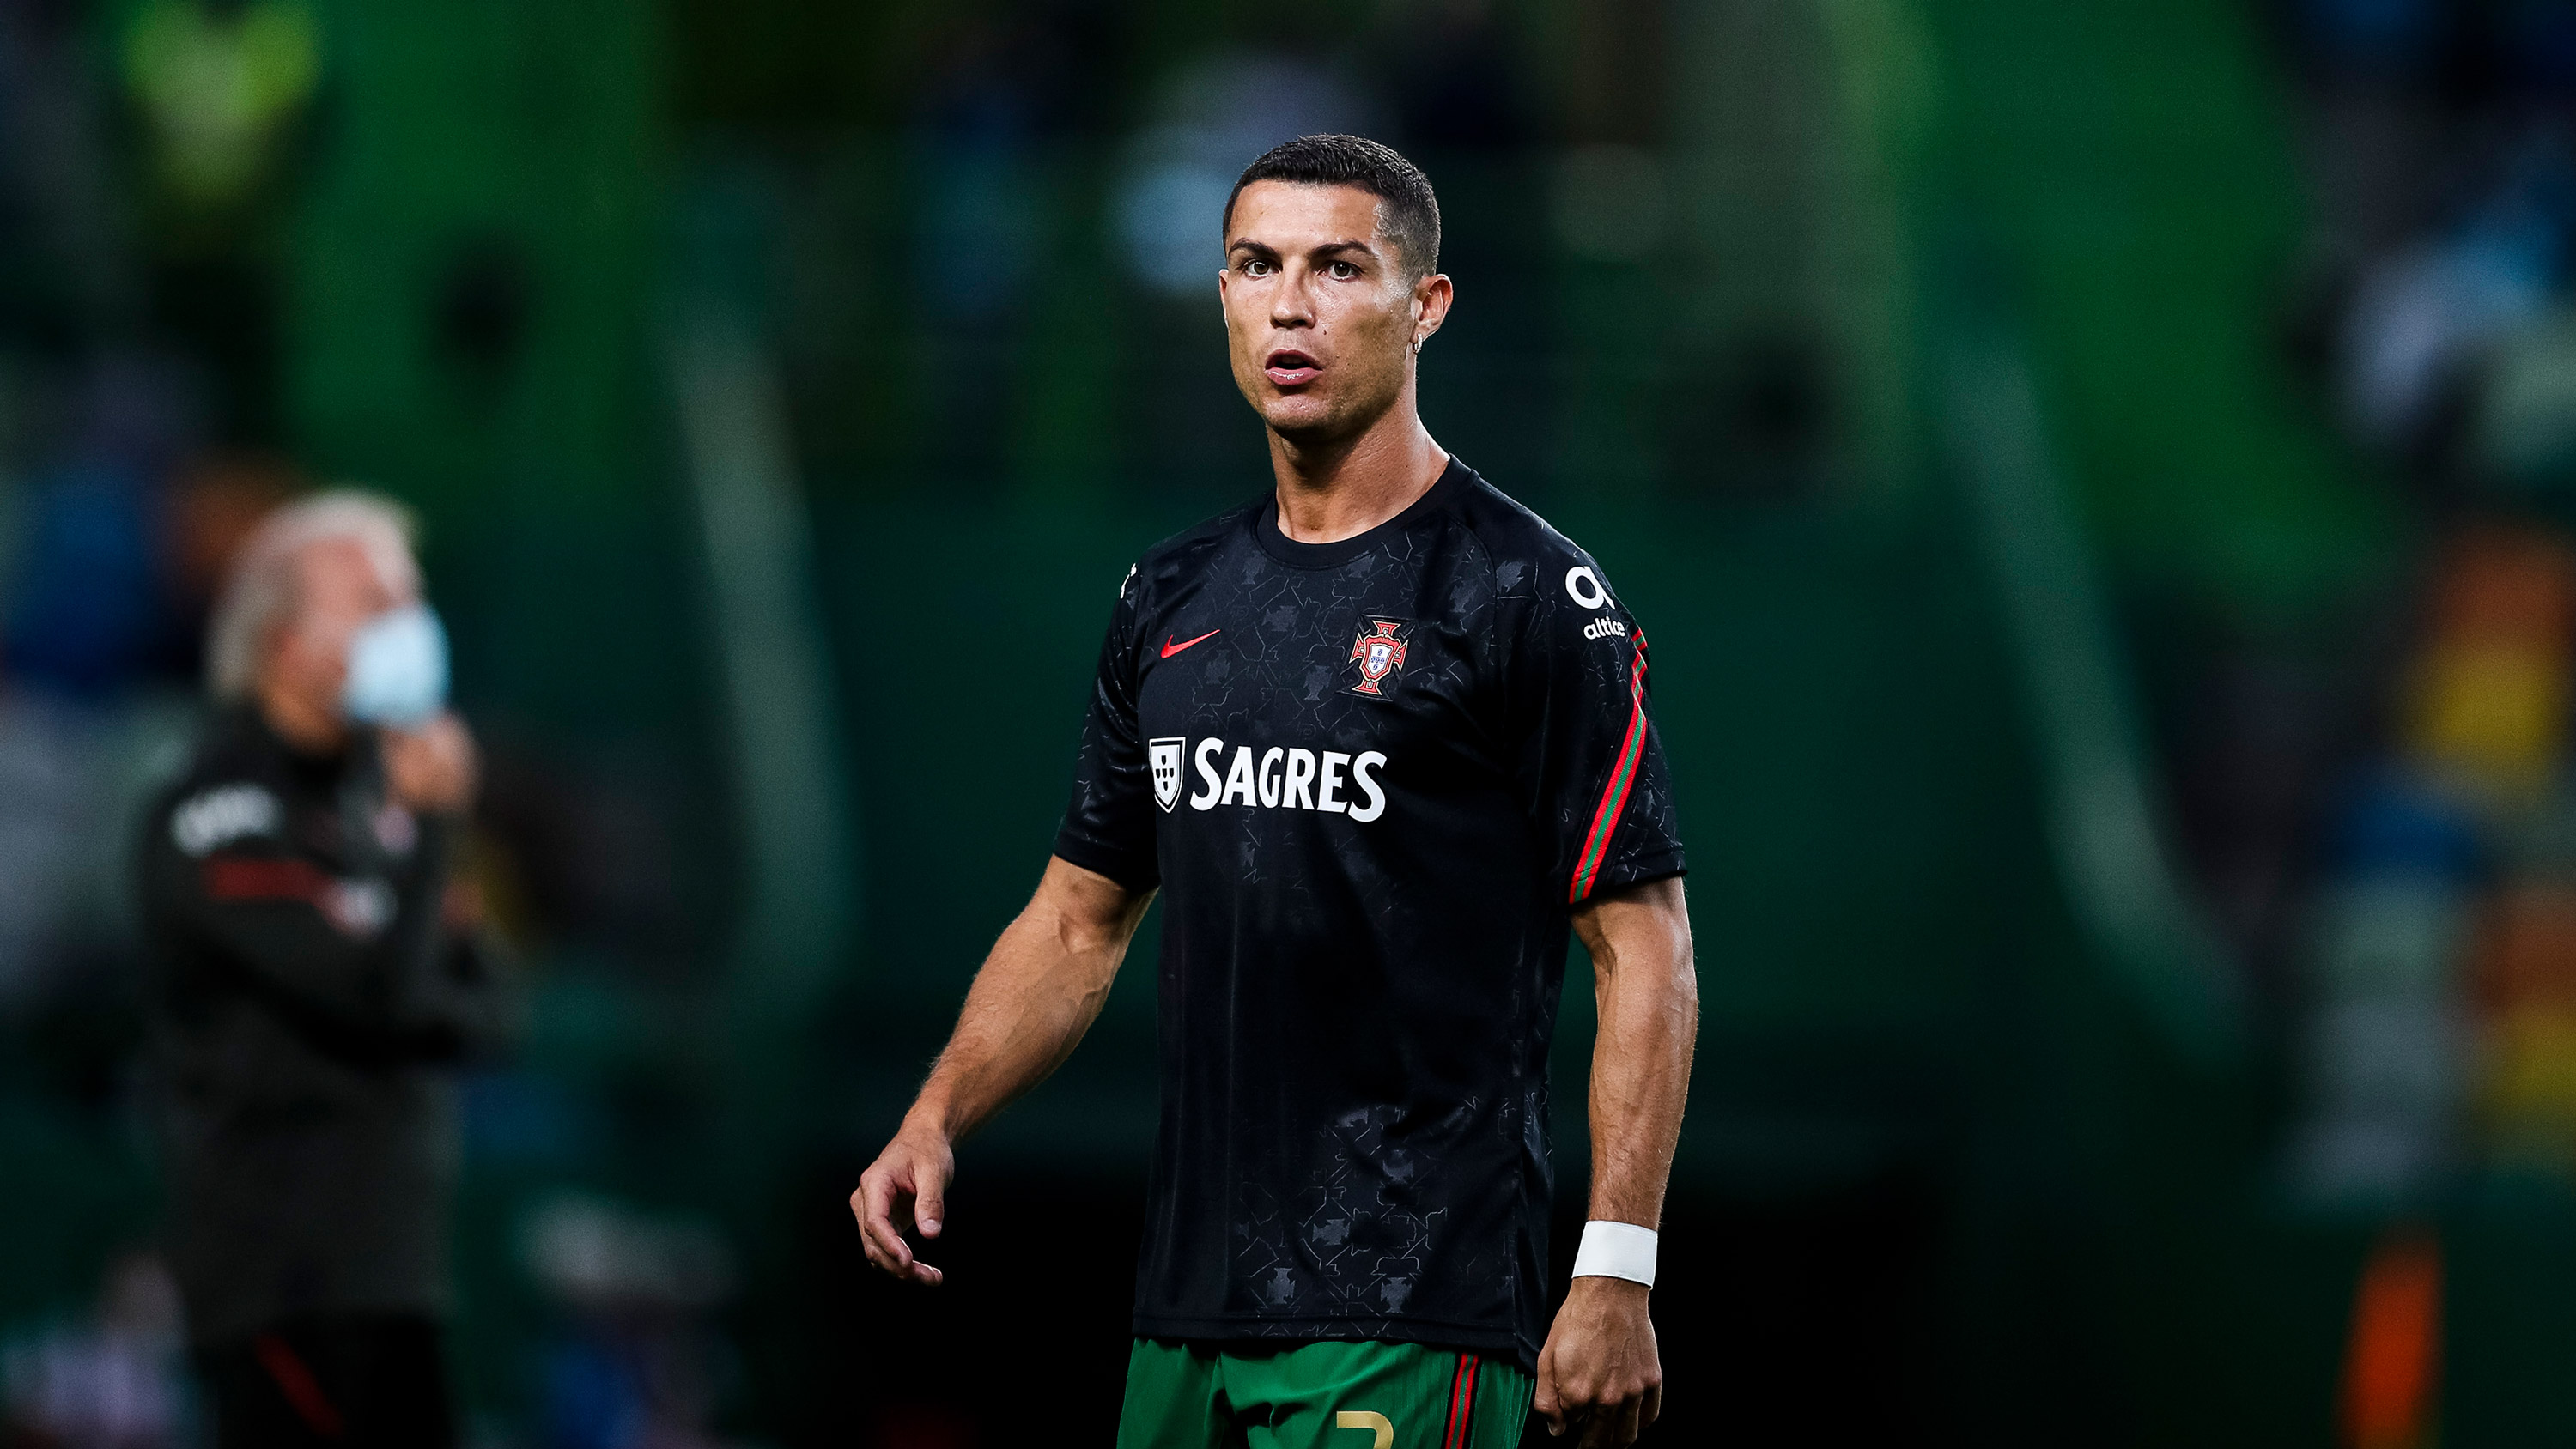 Portugal's forward Cristiano Ronaldo warms up before a friendly football match between Portugal and Spain at the Jose Alvalade Stadium in Lisbon on October 7.